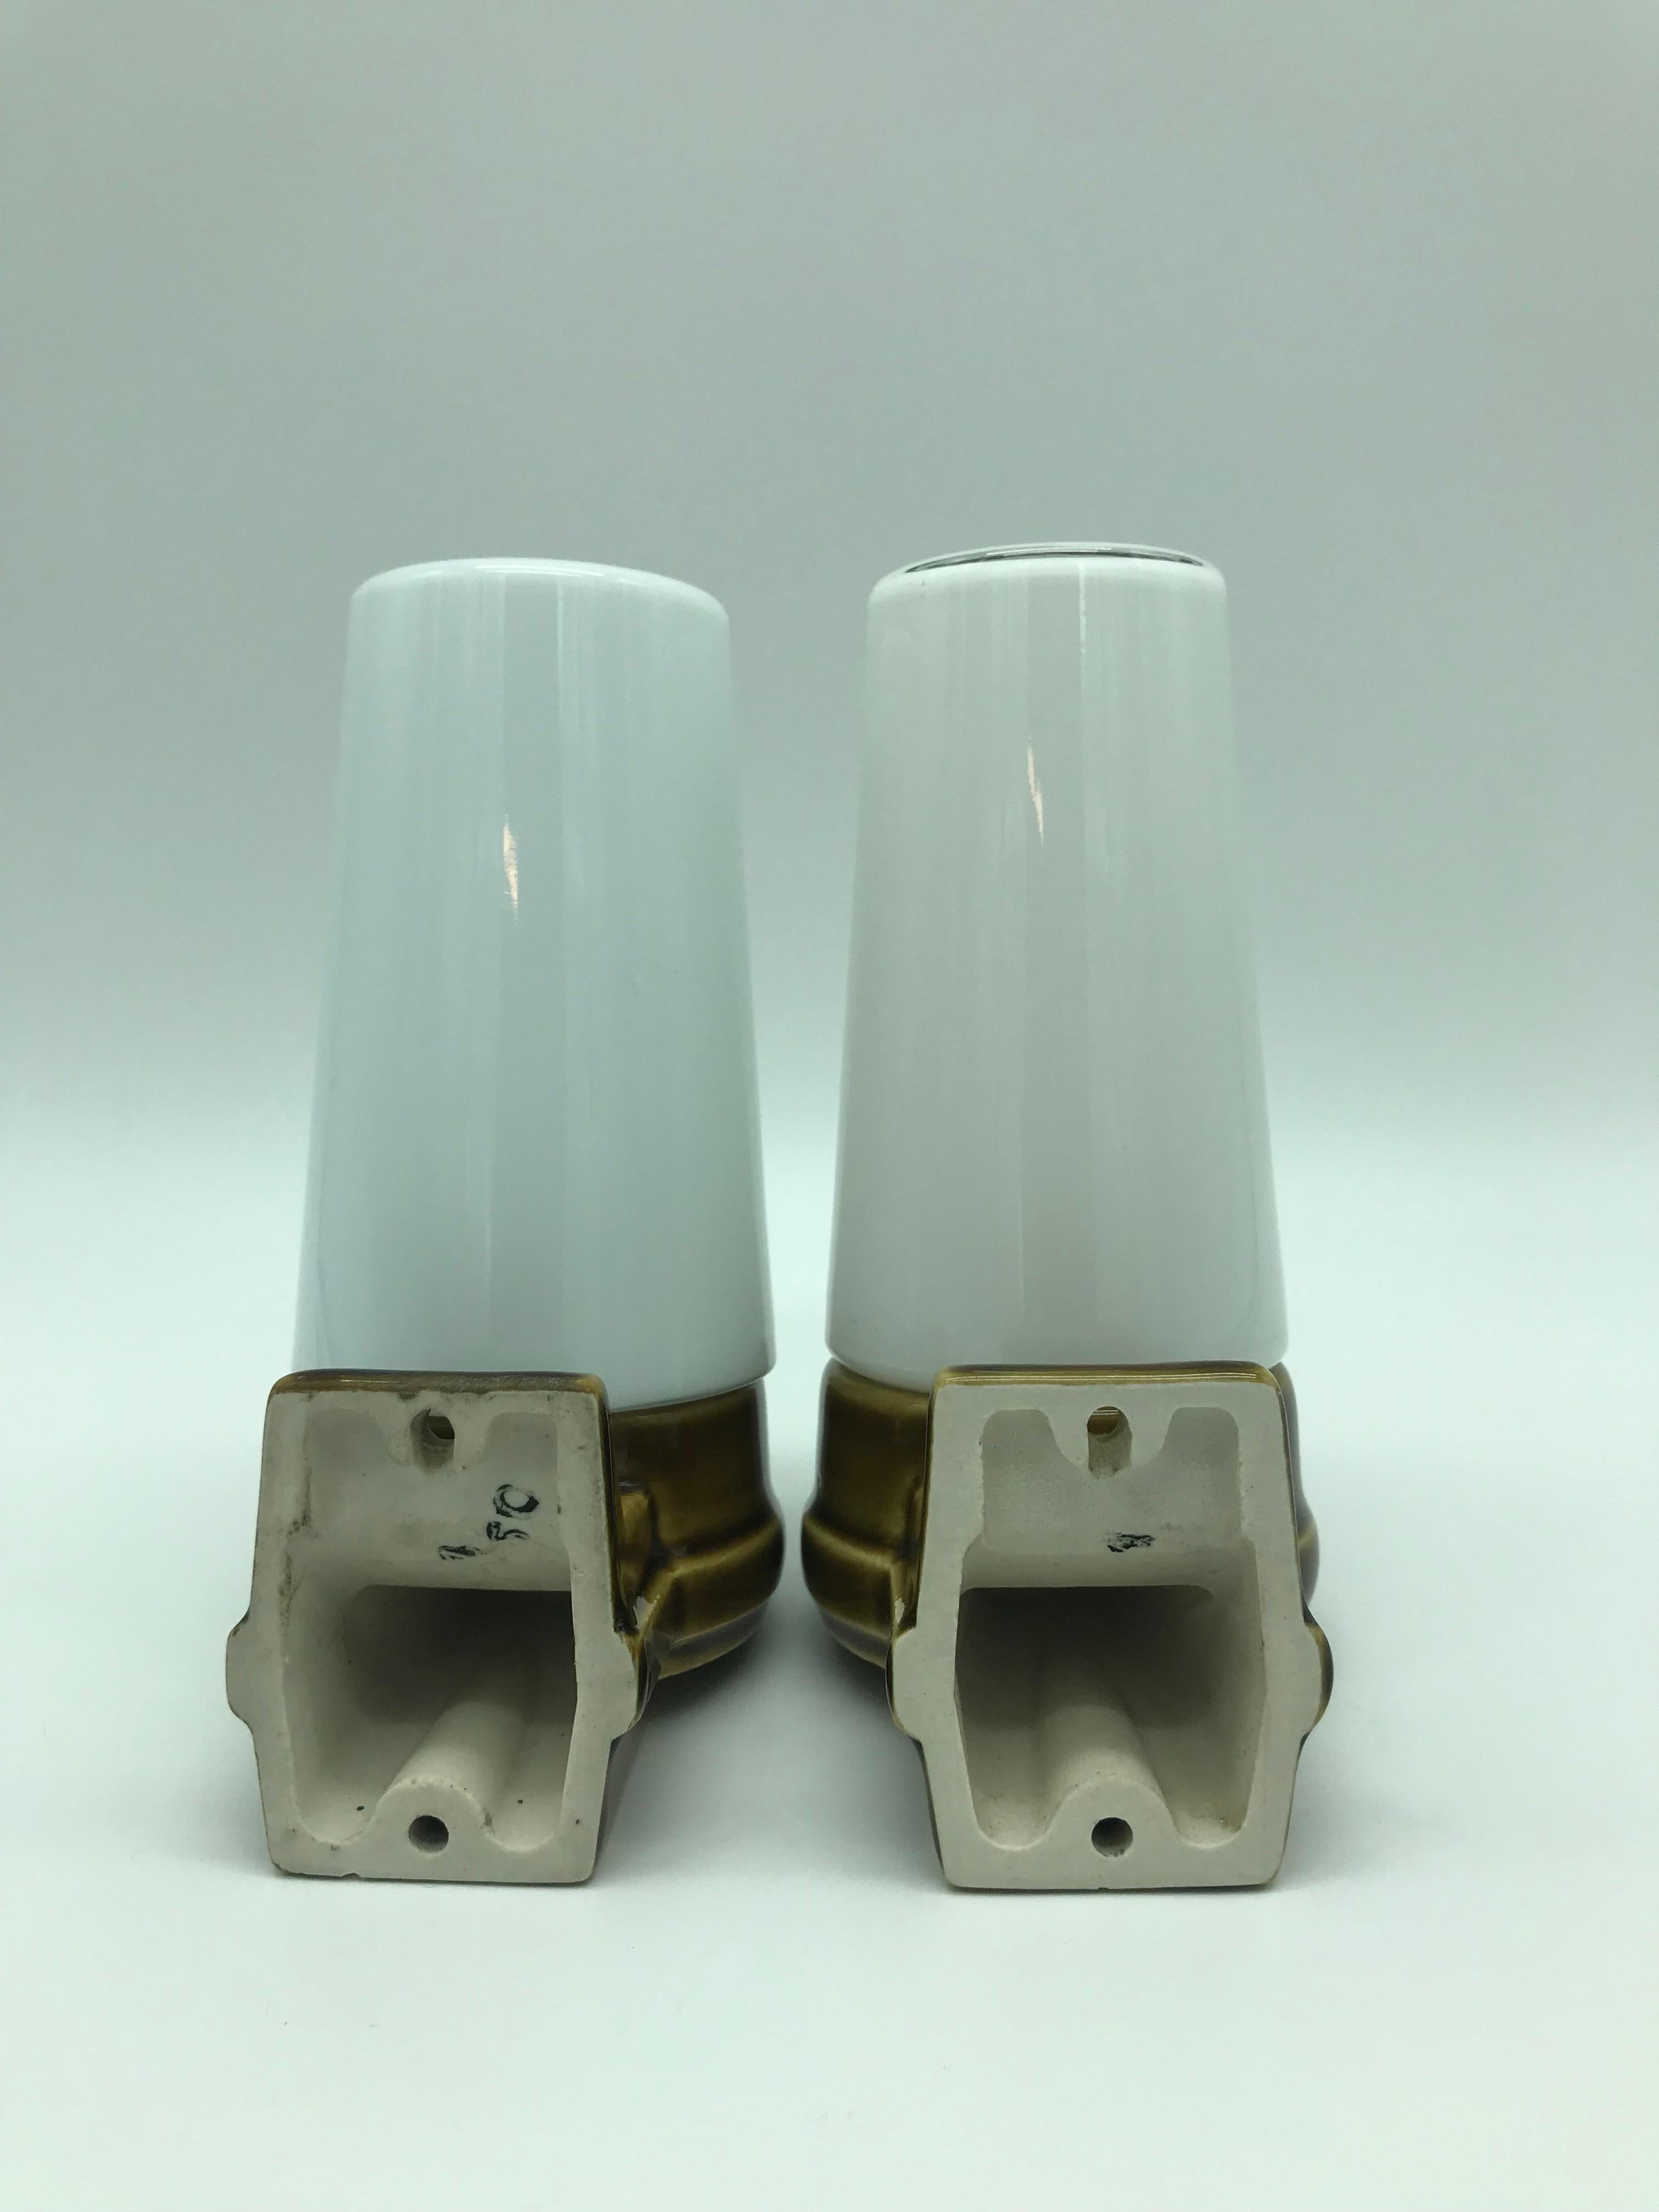 Swedish Vintage Ifö of Sweden Ceramic Bathroom Lamps with Opaline Shades from the 1960s